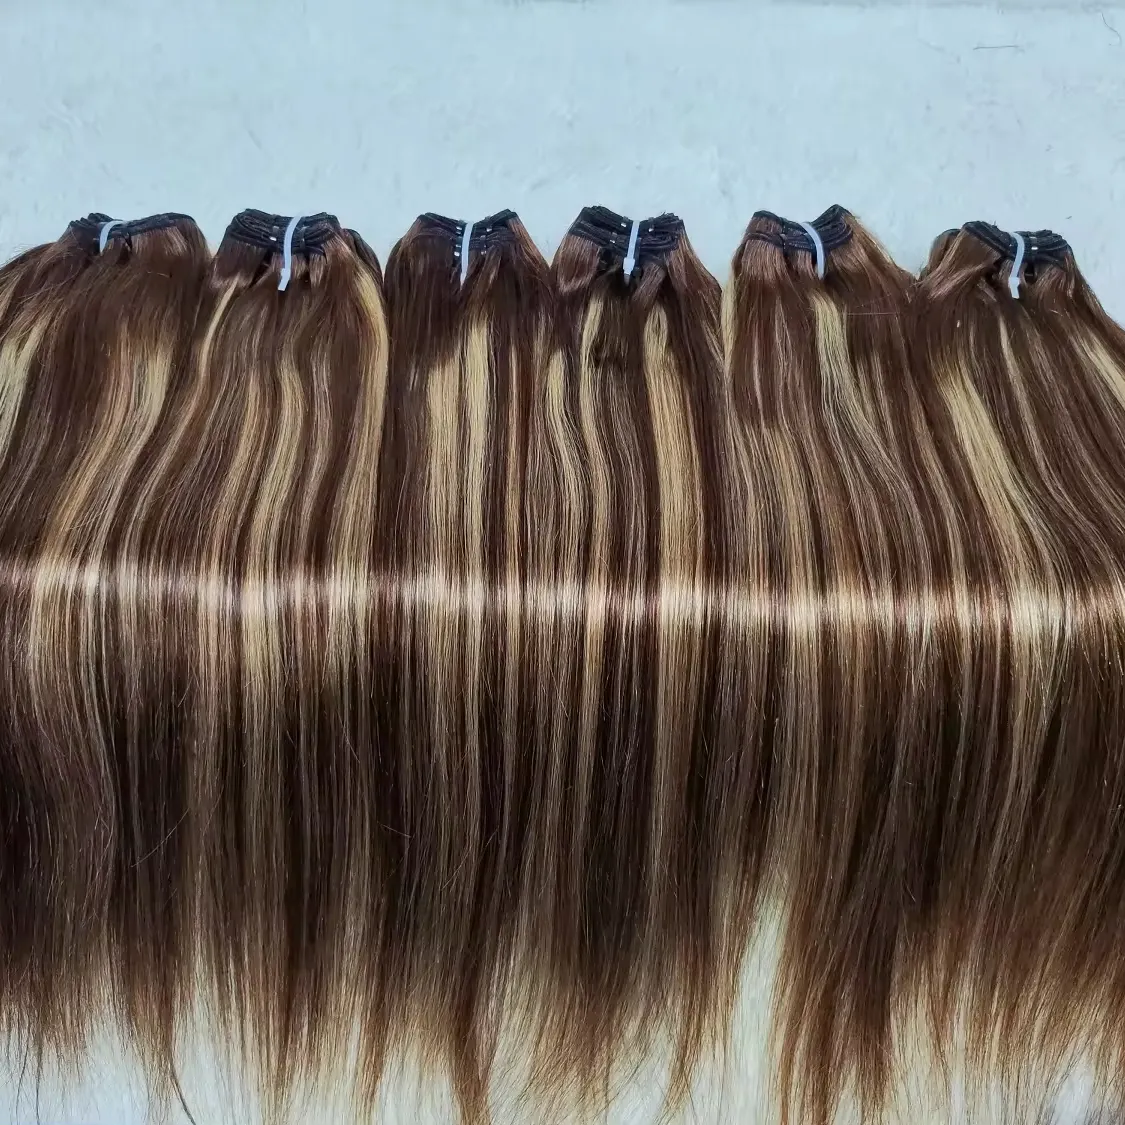 Letsfly 4-27 Piano Color Top Selling Straight Brazilian Human Hair Weave New Style Design For Woman Fast Shipping